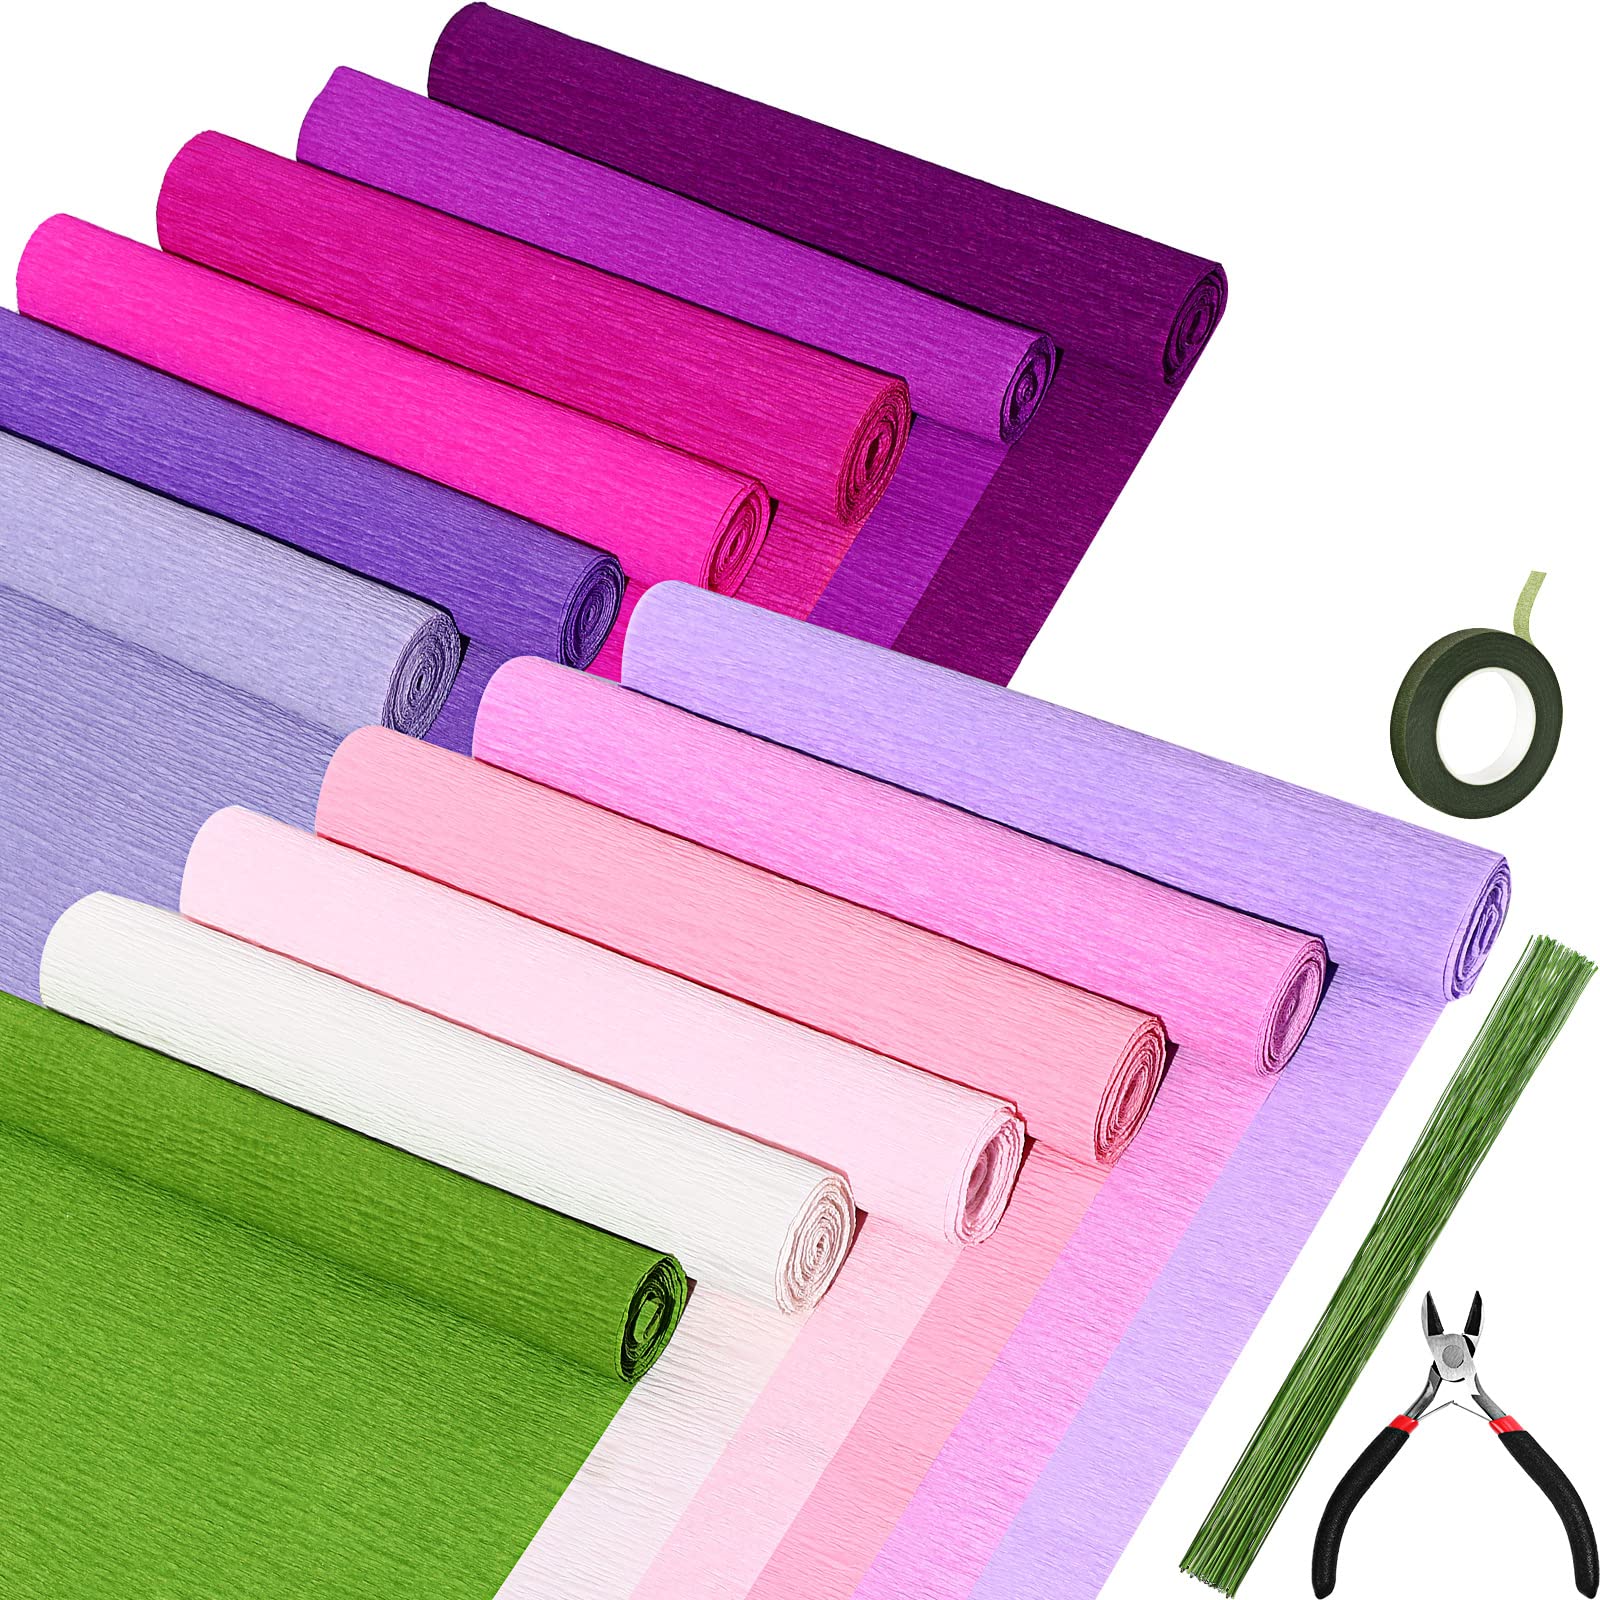 14 Colors Crepe Paper Rolls, 9.8 x 98 Inch Wide Crepe Paper Sheets with 100  Pcs Green Floral Iron Wire, Floral Band, Double-Sided Tape, and Scissors